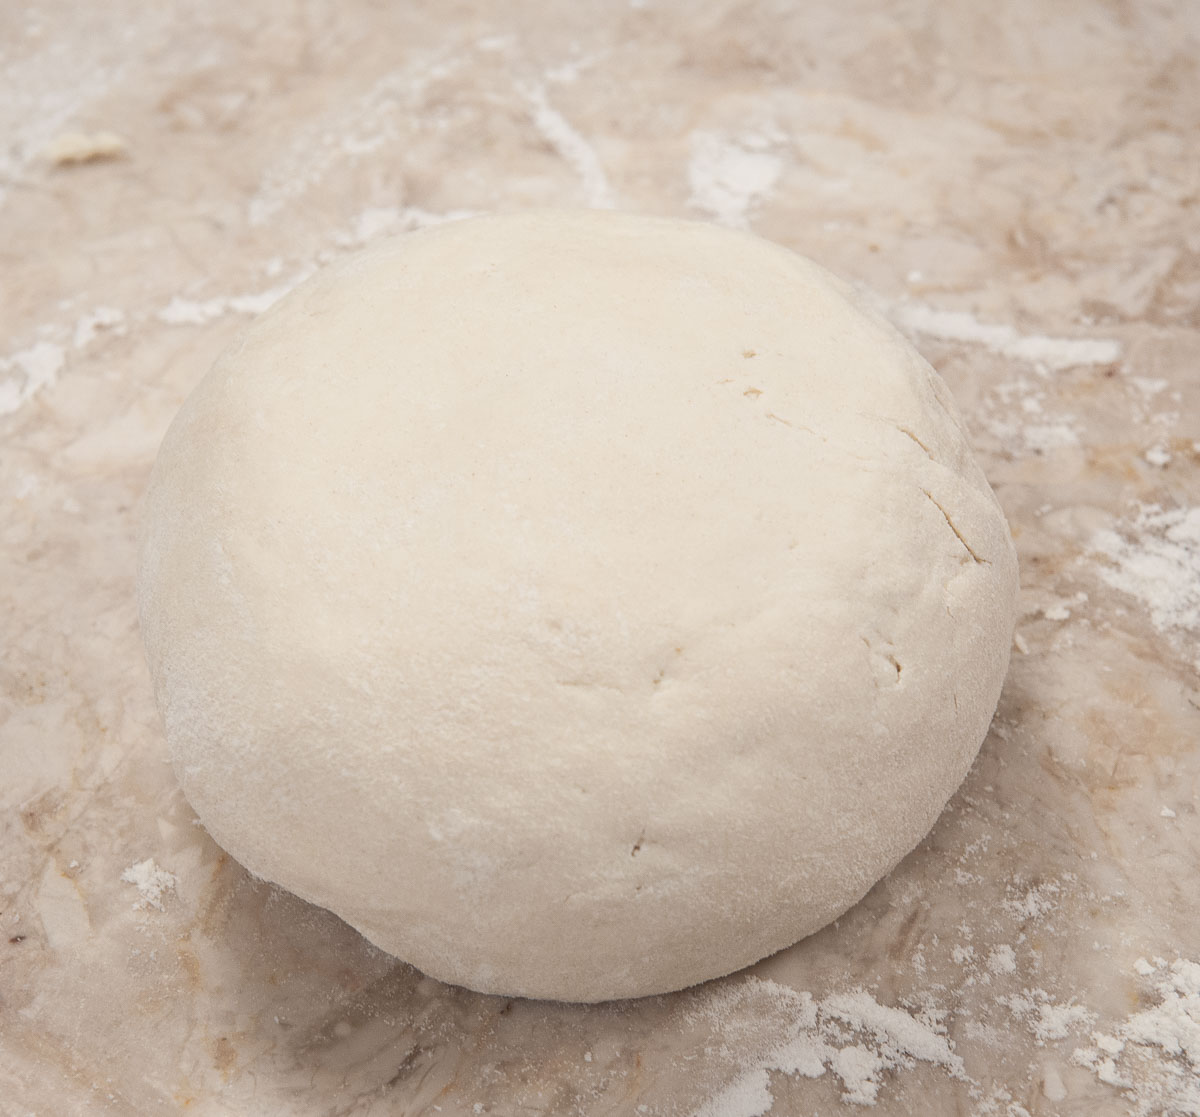 The dough is removed from the mixer and shaped into a ball.